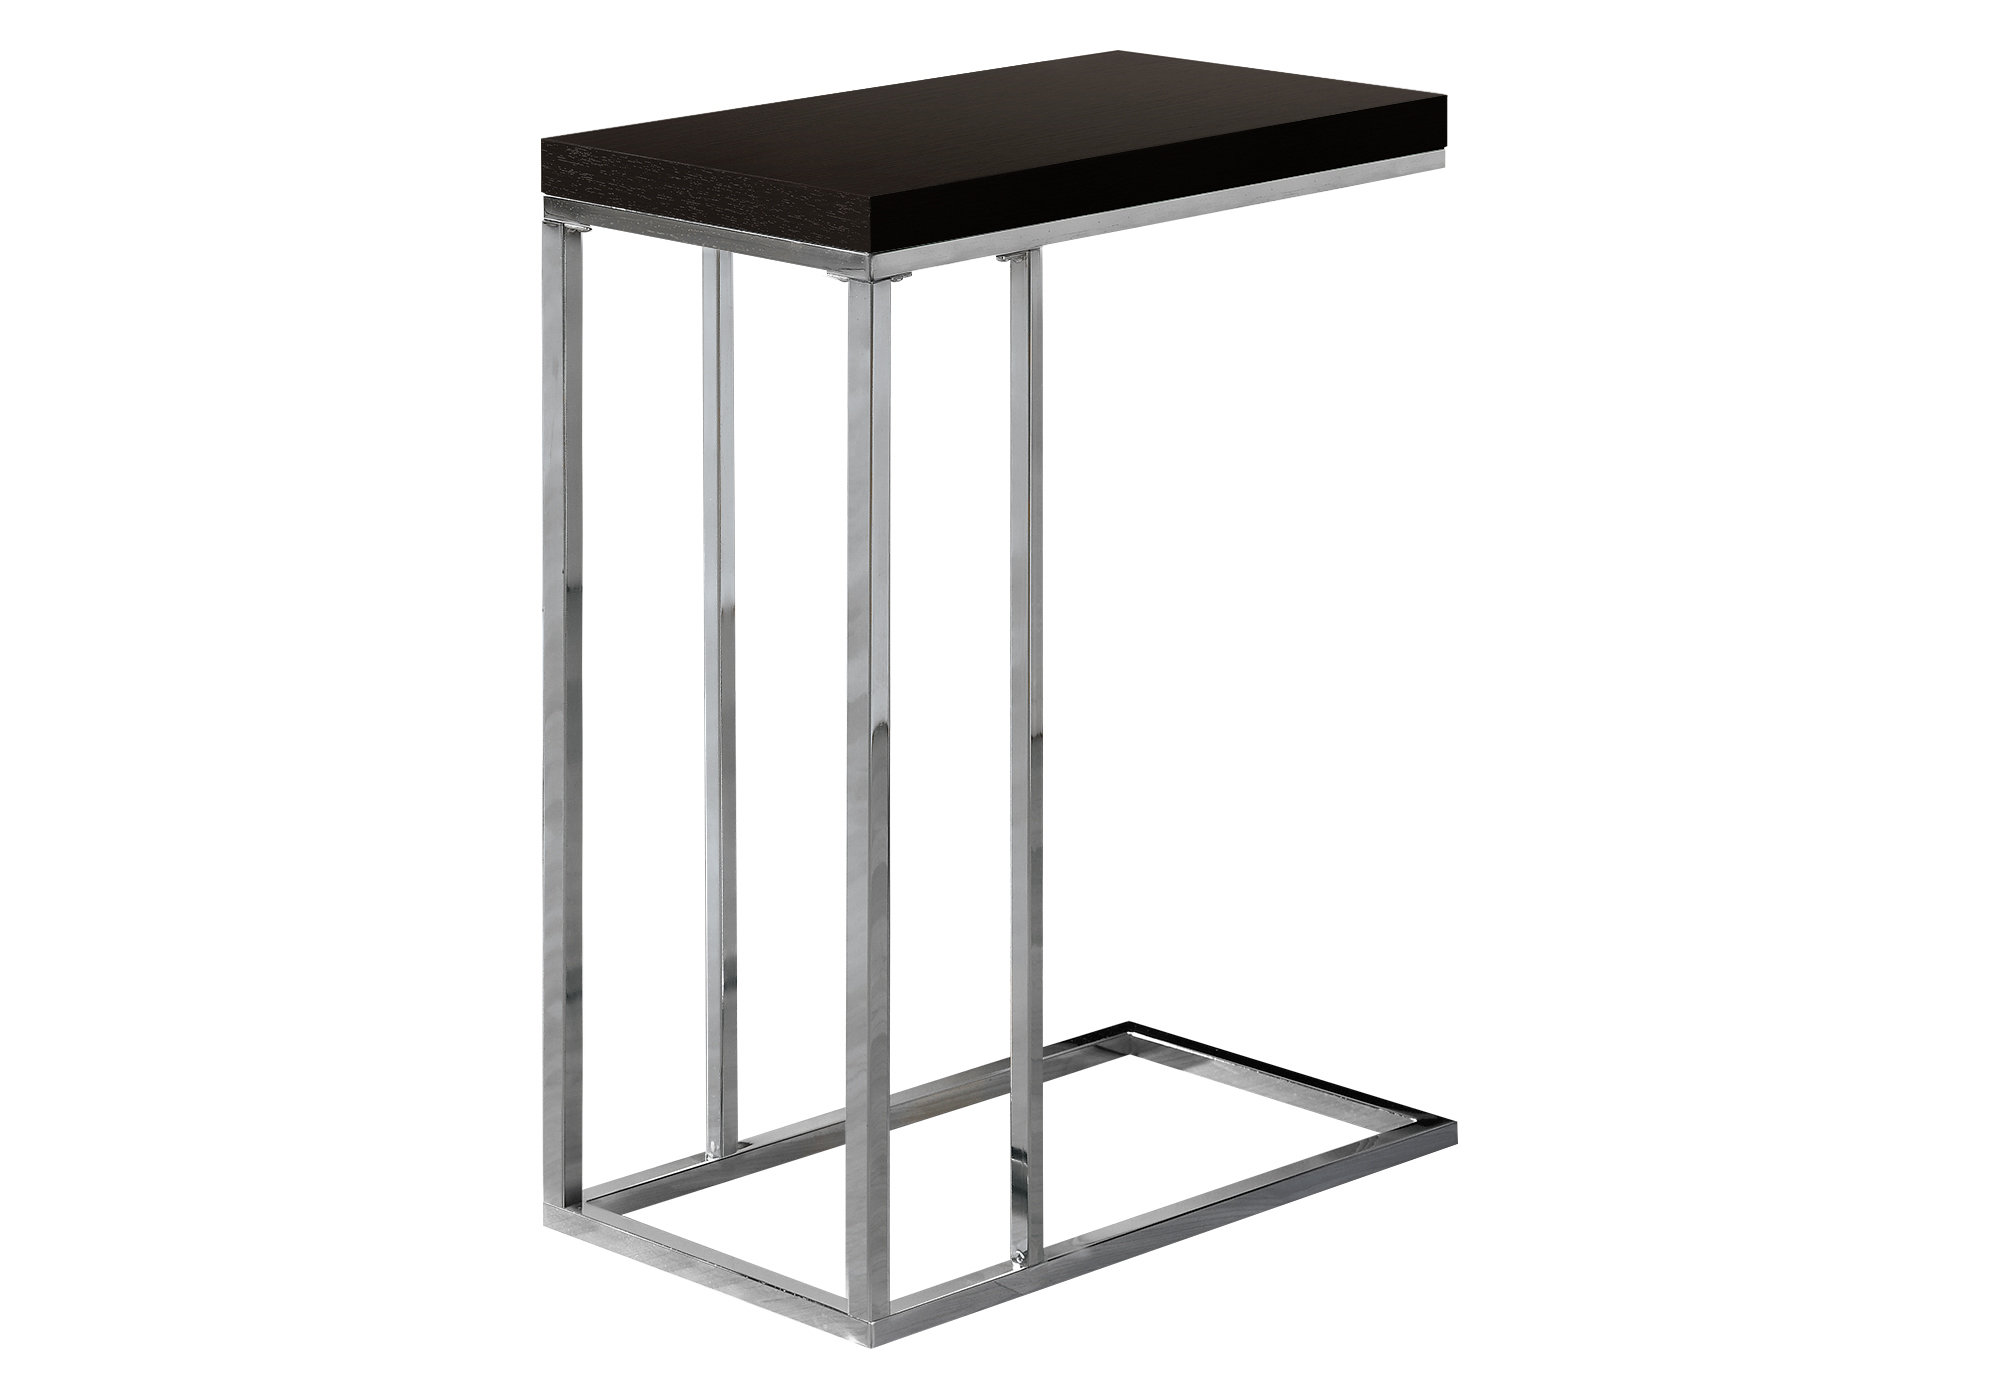 18.25" x 10.25" x 25.25" Cappuccino Particle Board Metal Accent Table